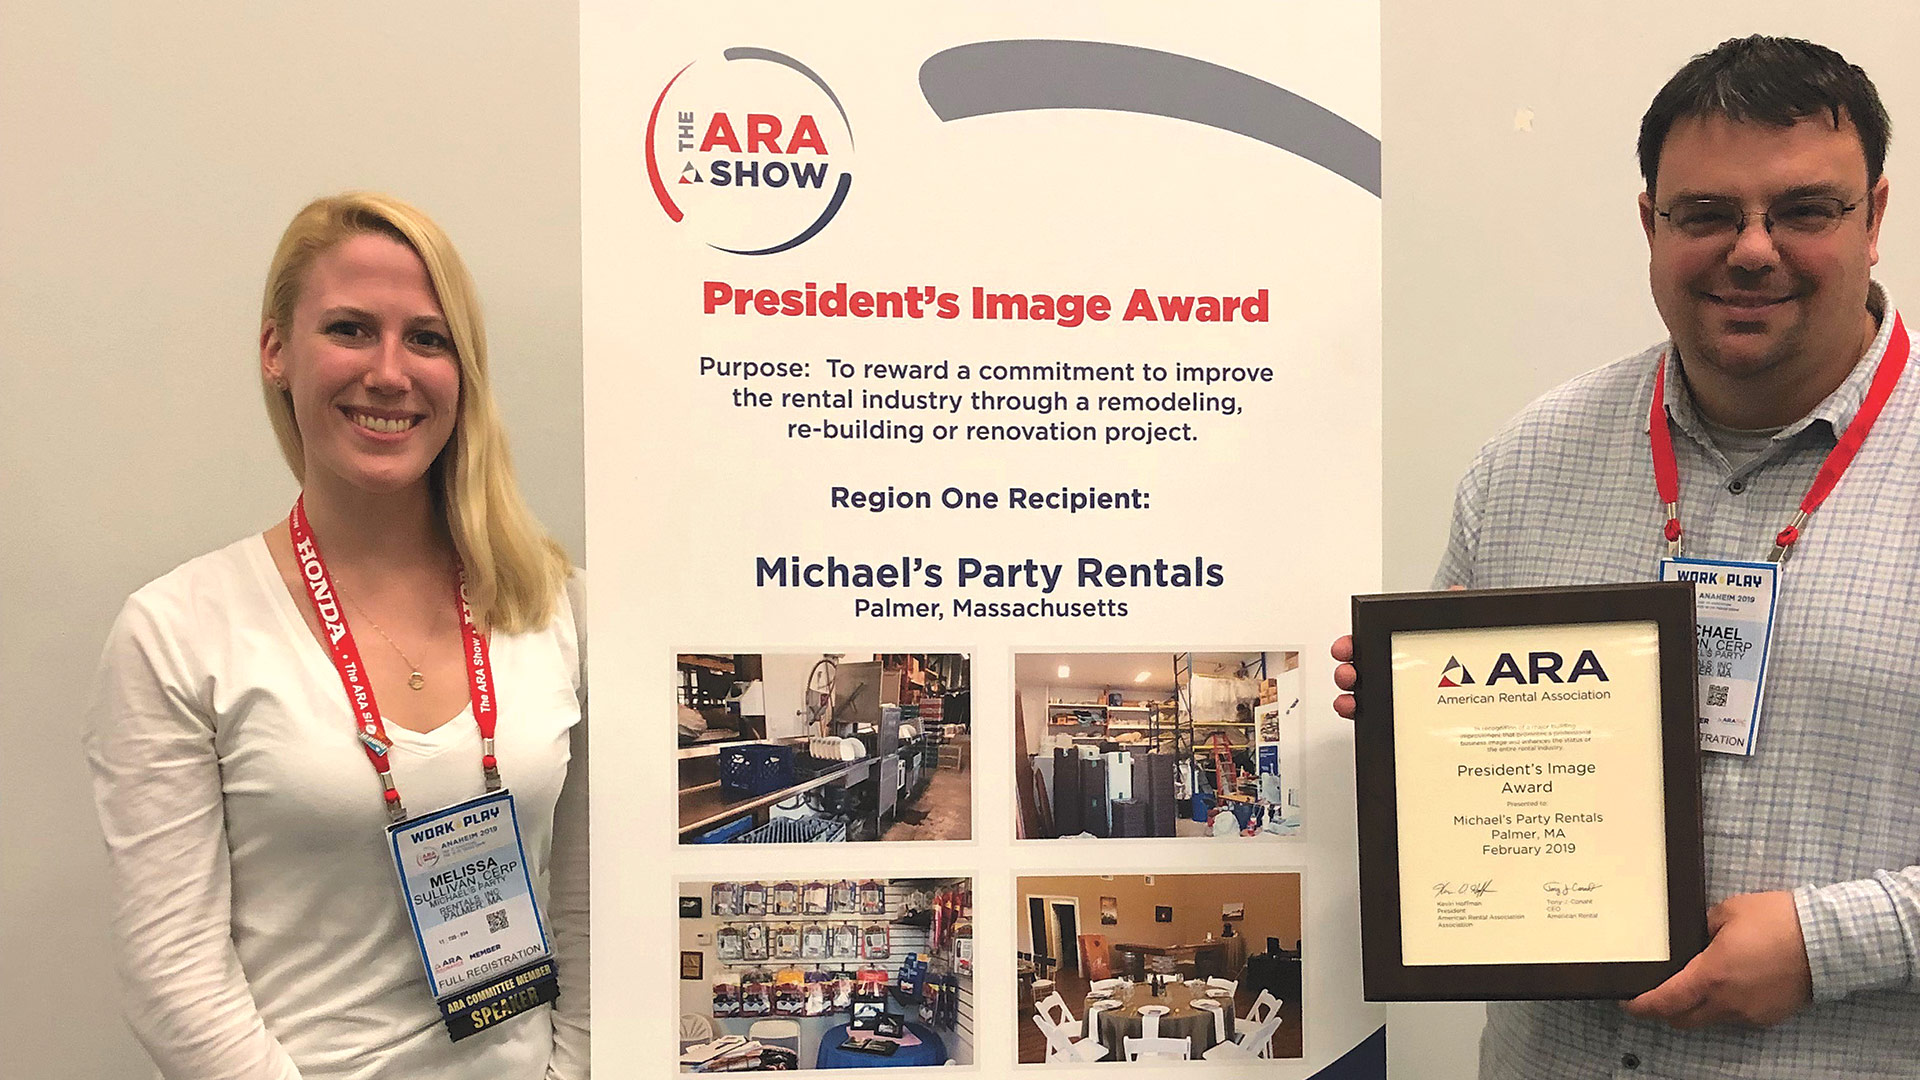 Michael’s Party Rentals recently received a national accolade at the 2019 American Rental Assoc. (ARA) annual convention and trade show in Anaheim, Calif.  The company was acknowledged with a Presidents Image Award, given to a business facility or store celebrating its commitment to improving the rental-industry image through a remodeling, rebuilding, or renovation project. The award was in response to Michael’s Party Rentals’ new showroom, which opened in July 2016. Pictured: Melissa Sullivan (left) and Michael Linton accept the award.